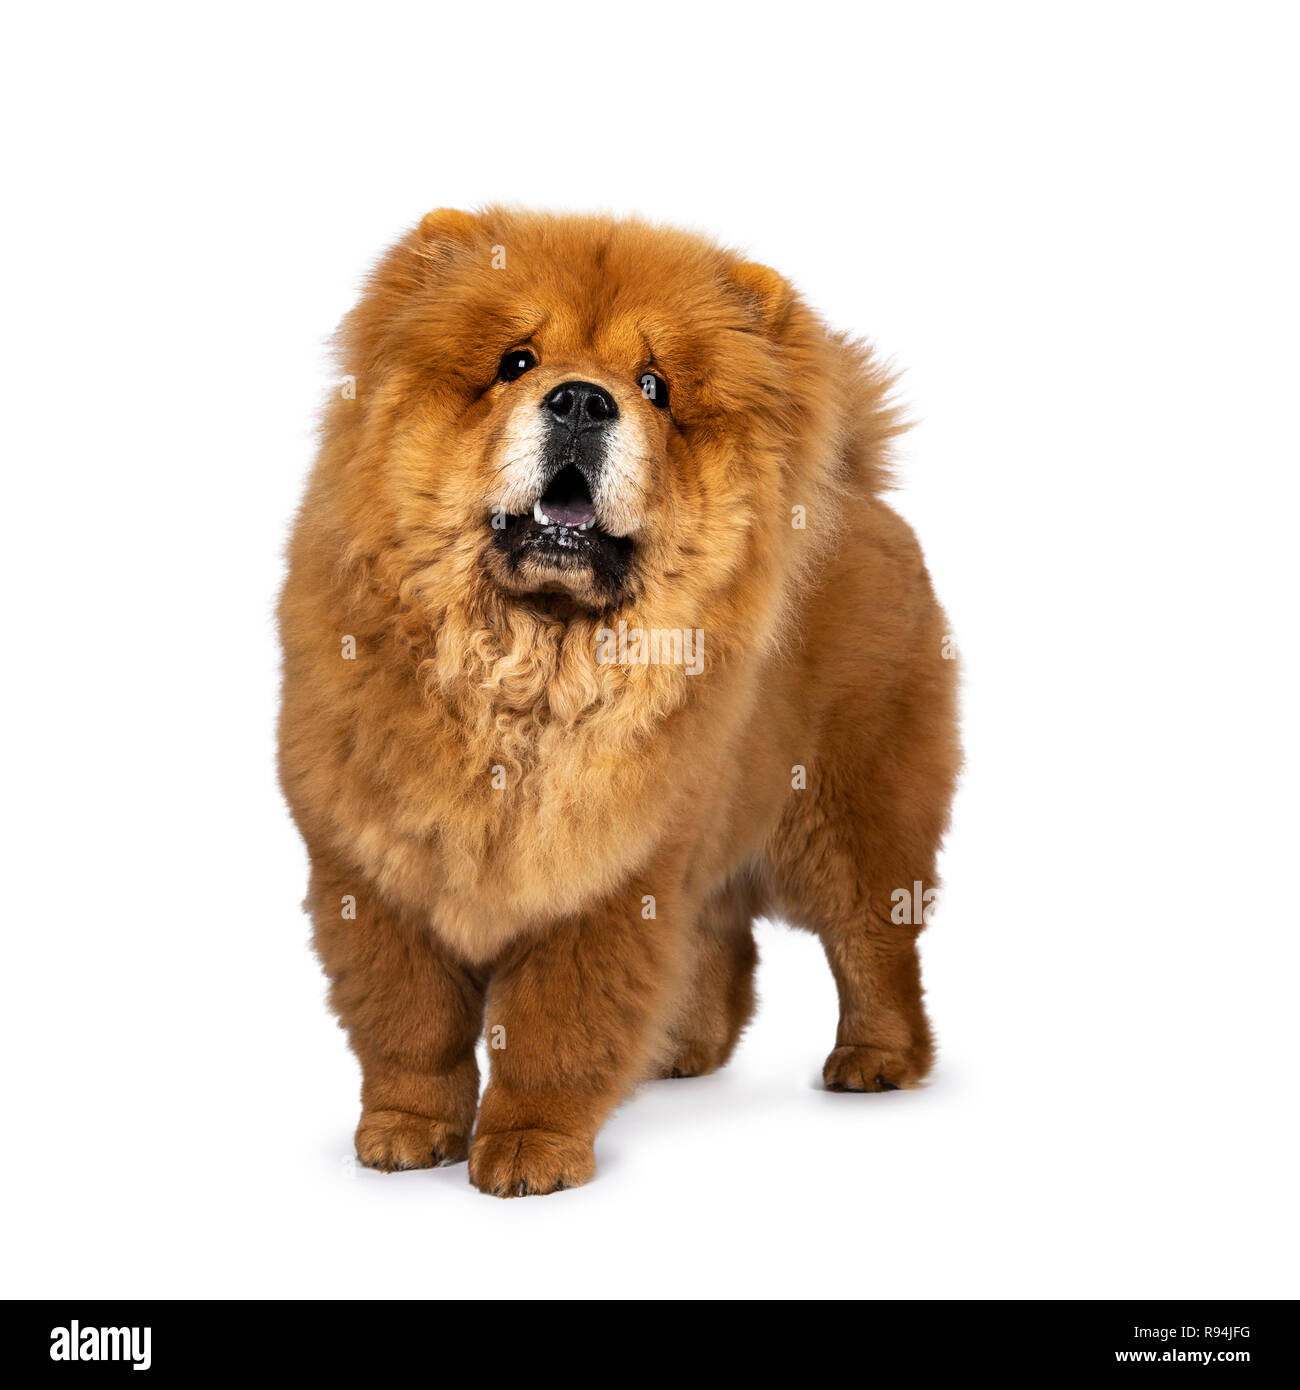 Cute fluffy Chow Chow pup dog, standing half side ways looking up. Isolated on a white background. Mouth open, showing blue tongue. Stock Photo